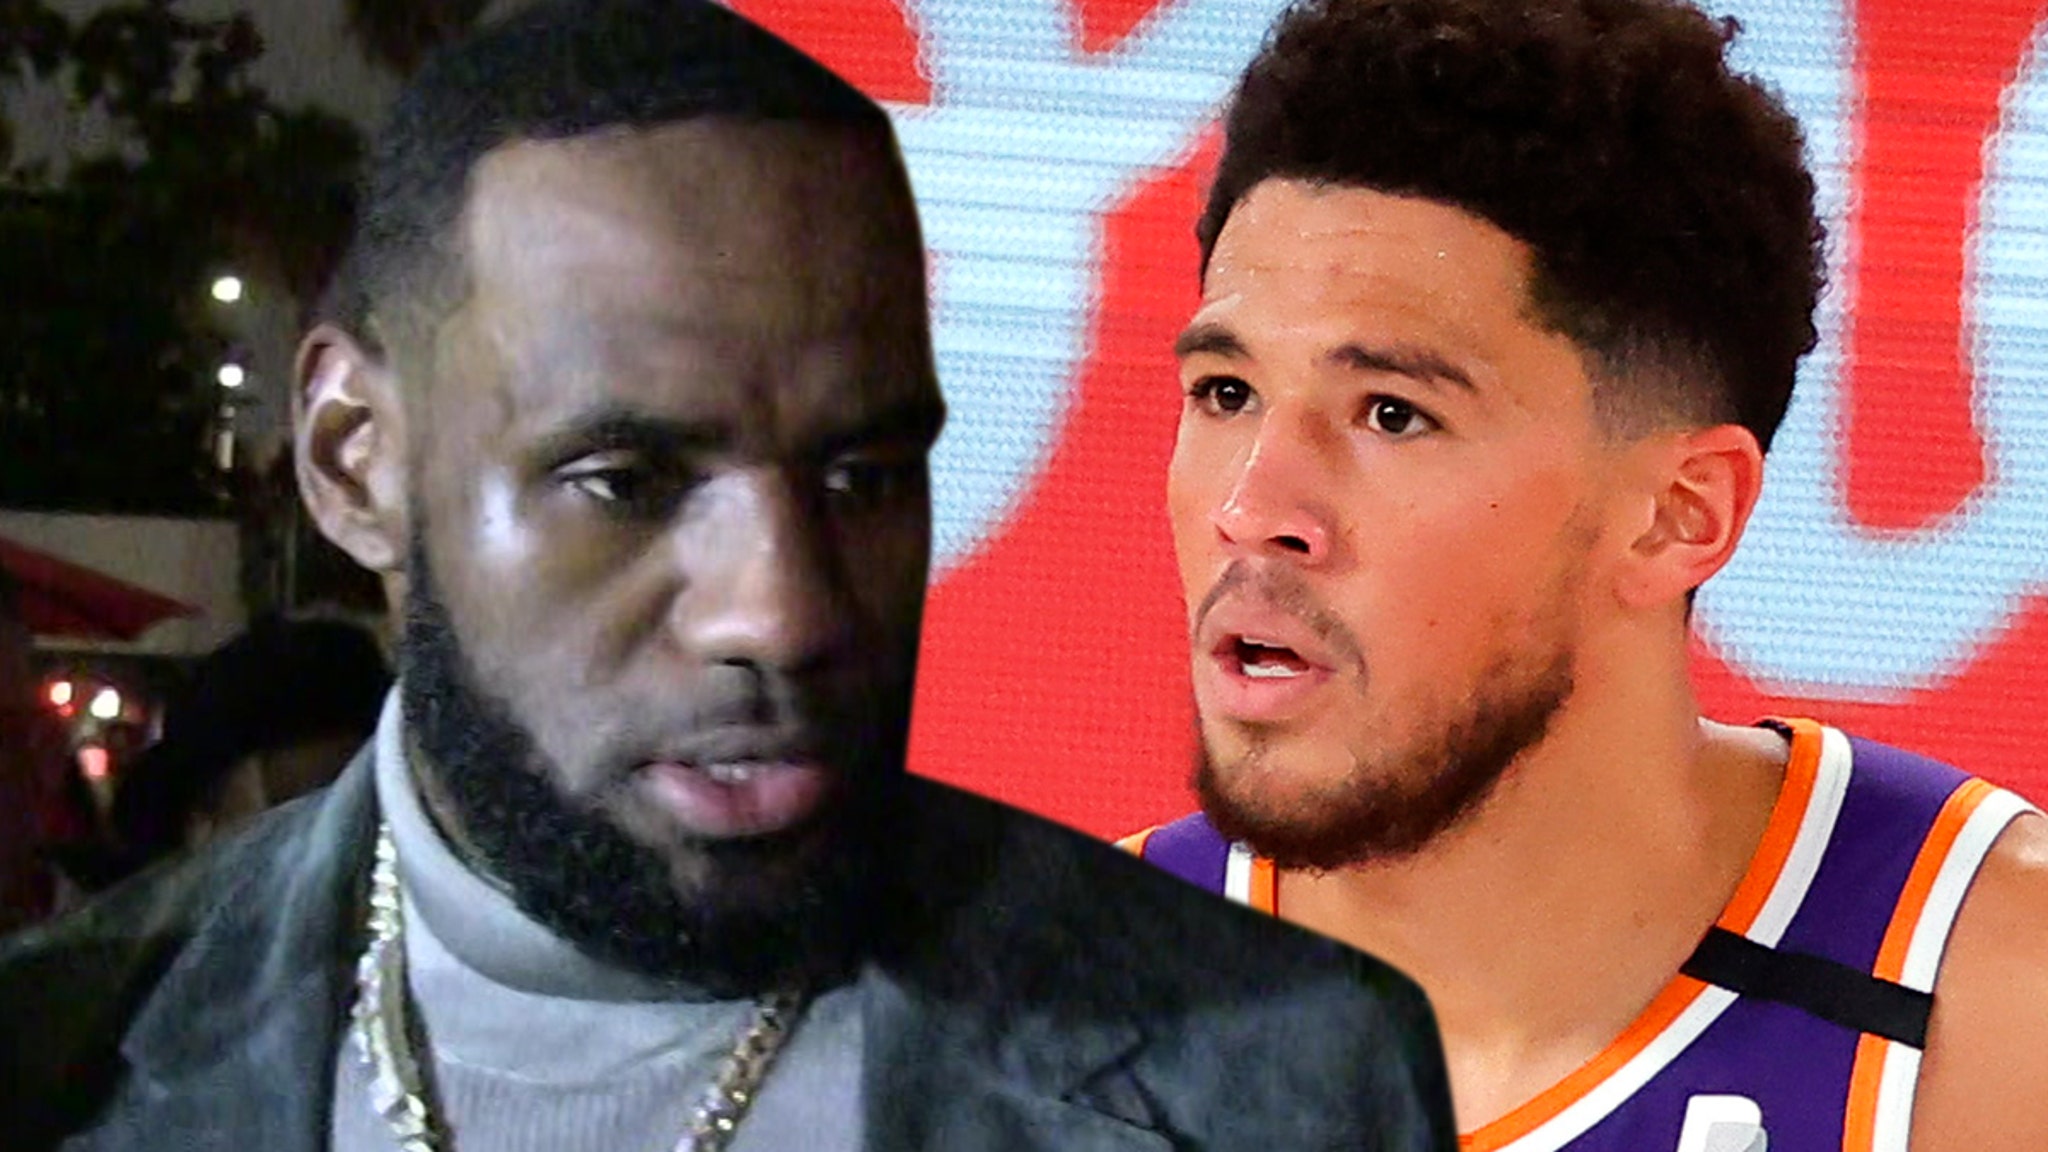 LeBron James calls Devin Booker the NBA’s “most disrespected player” after an All-Star snob